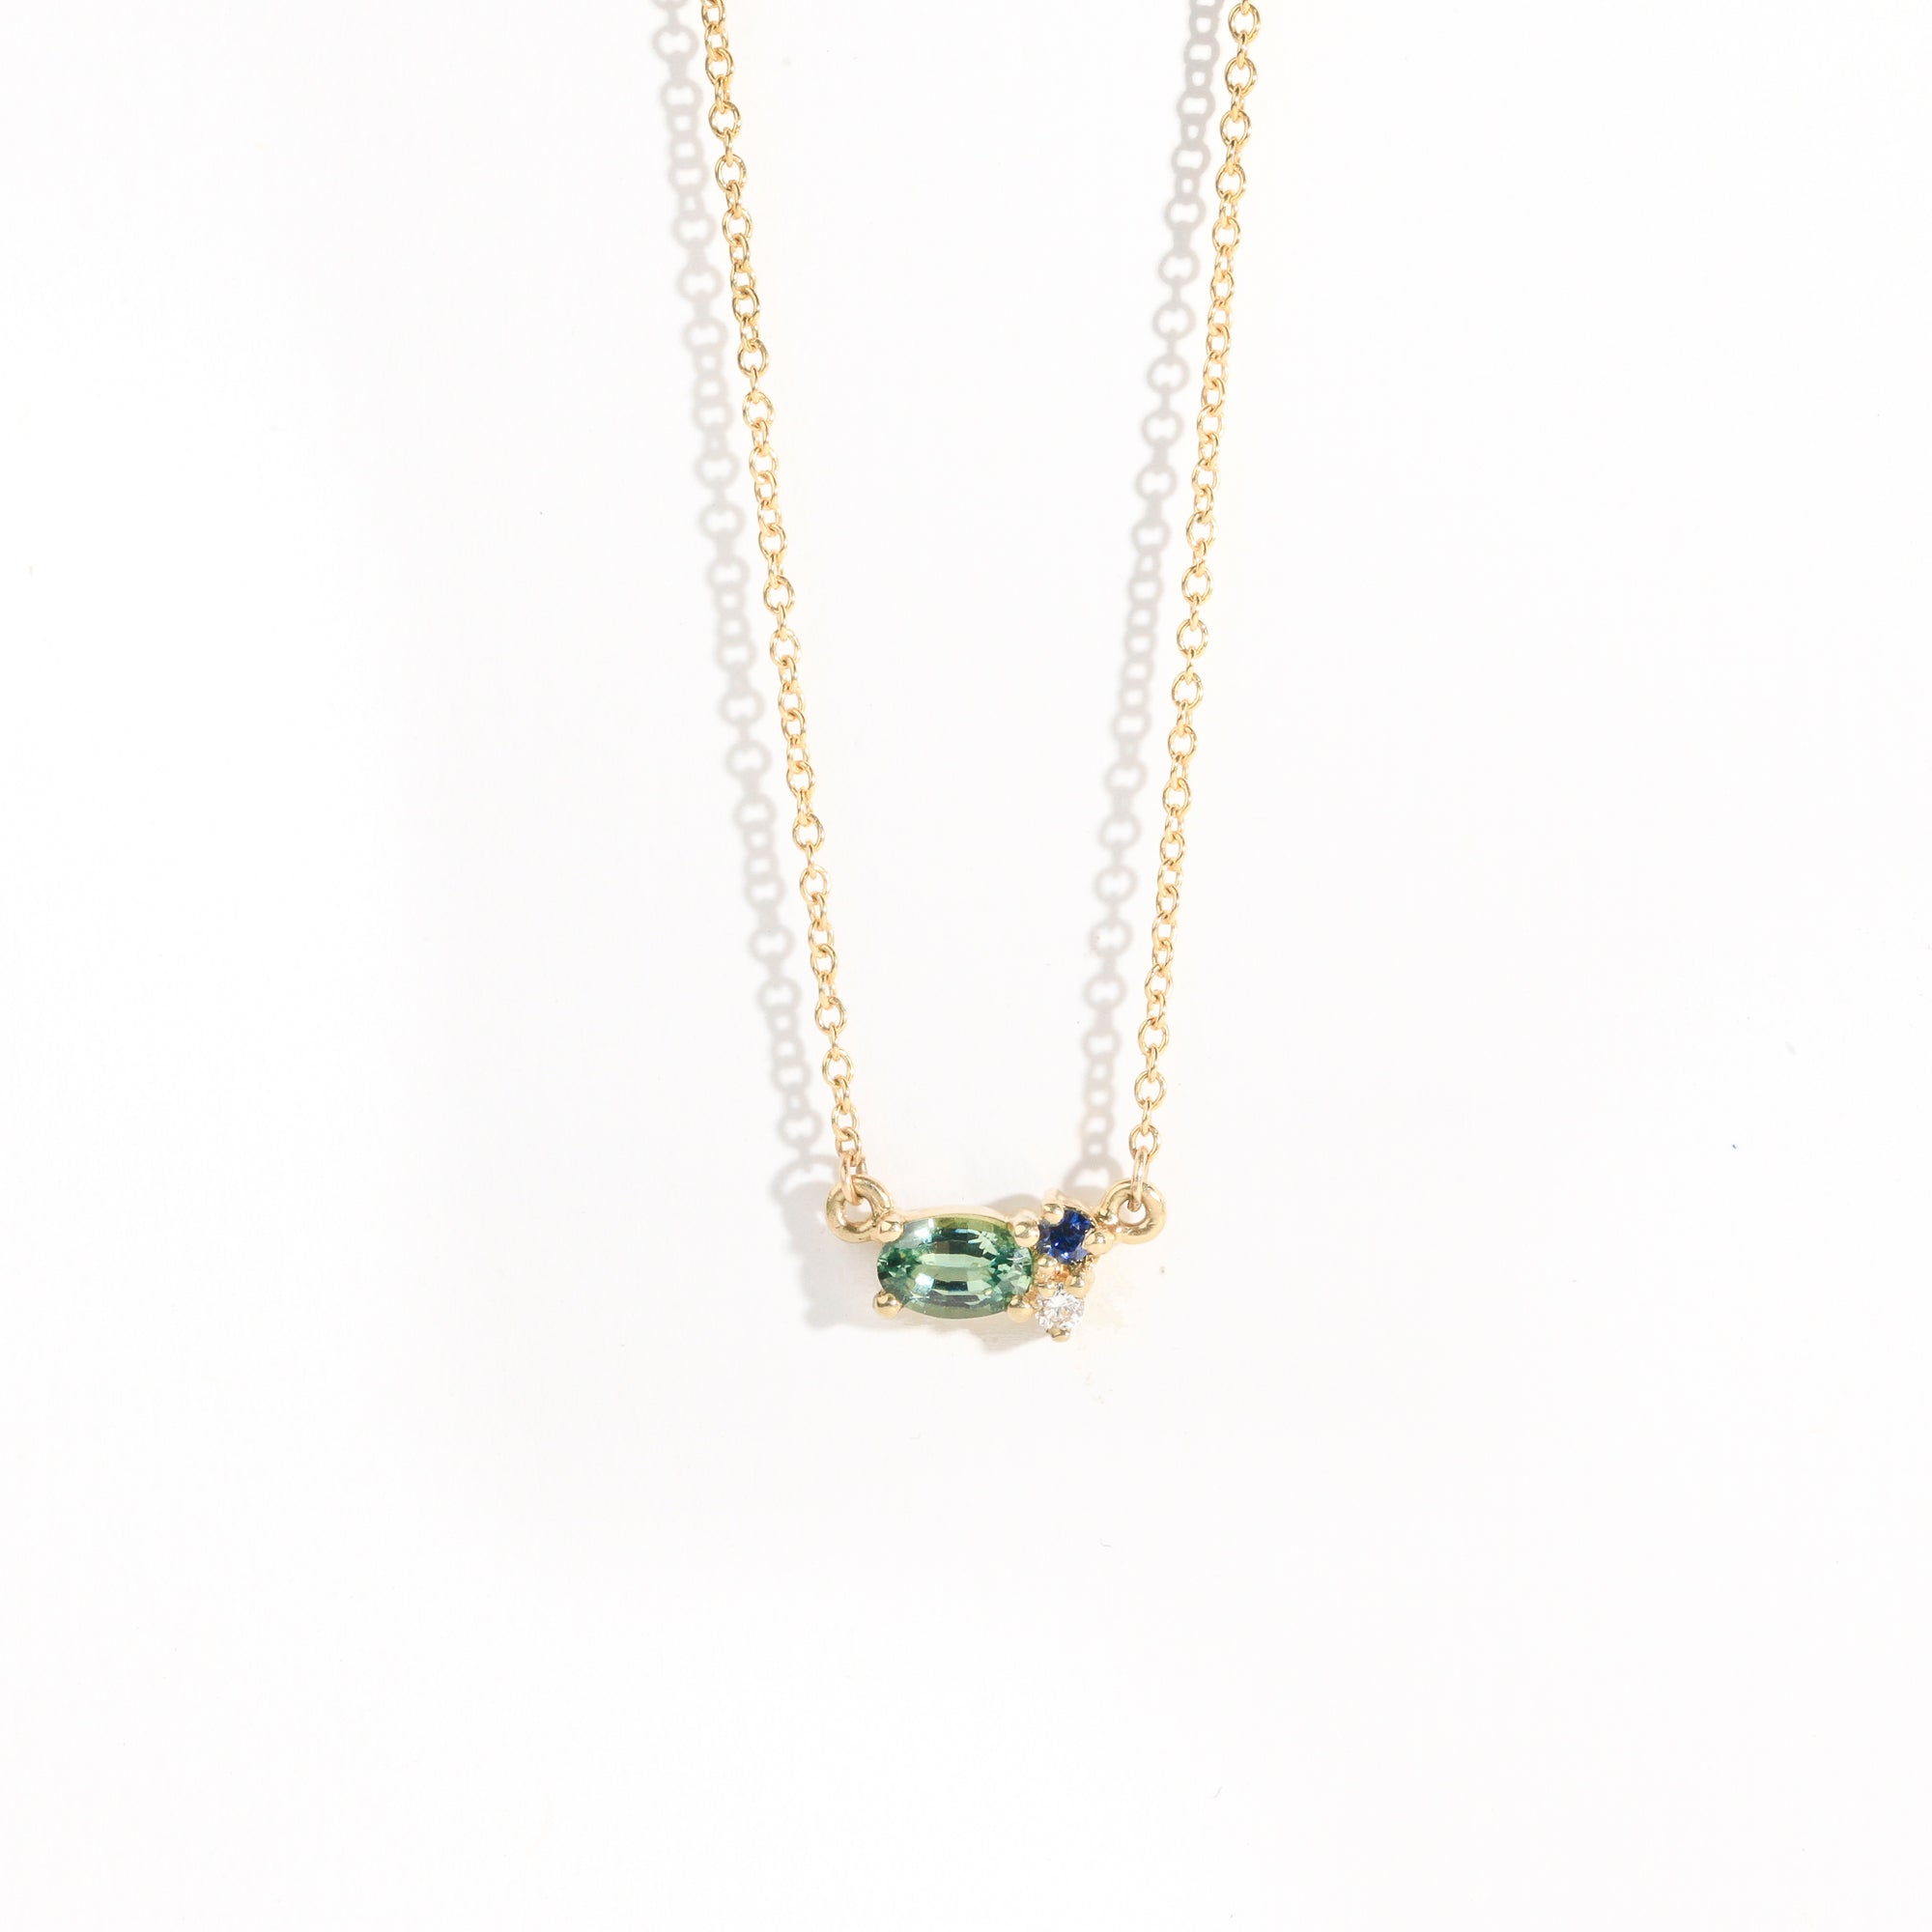 9 carat yellow gold three stone pendant, with a central green ethically sourced Australian sapphire, a deep blue round sapphire and a white diamond. 